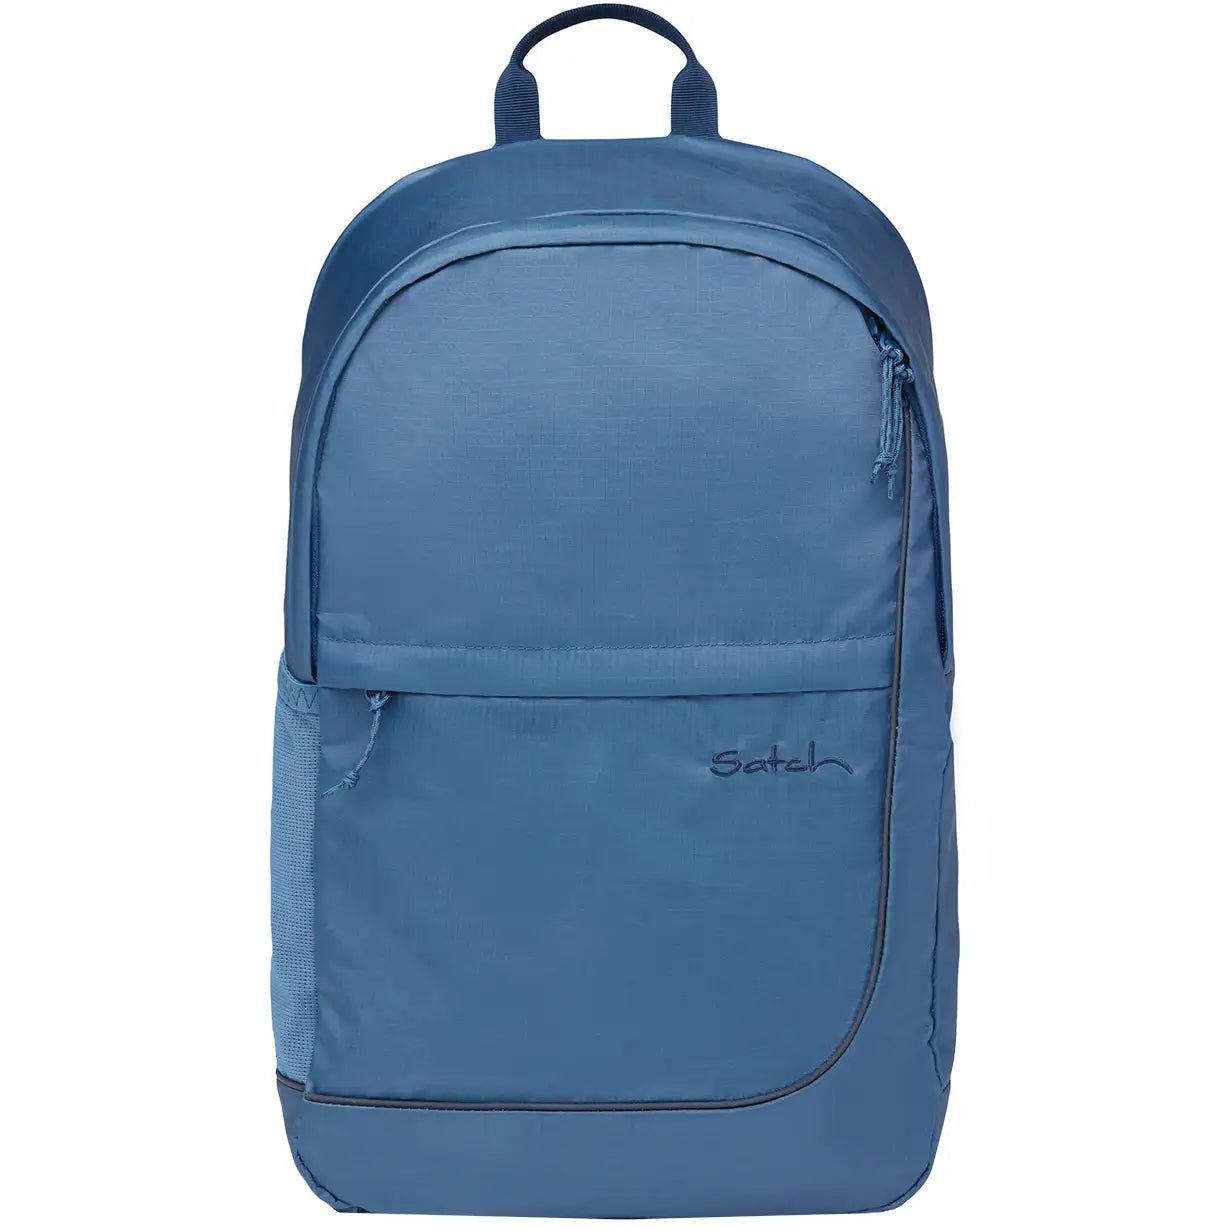 Satch Fly leisure backpack 45 cm - Ripstop Blue